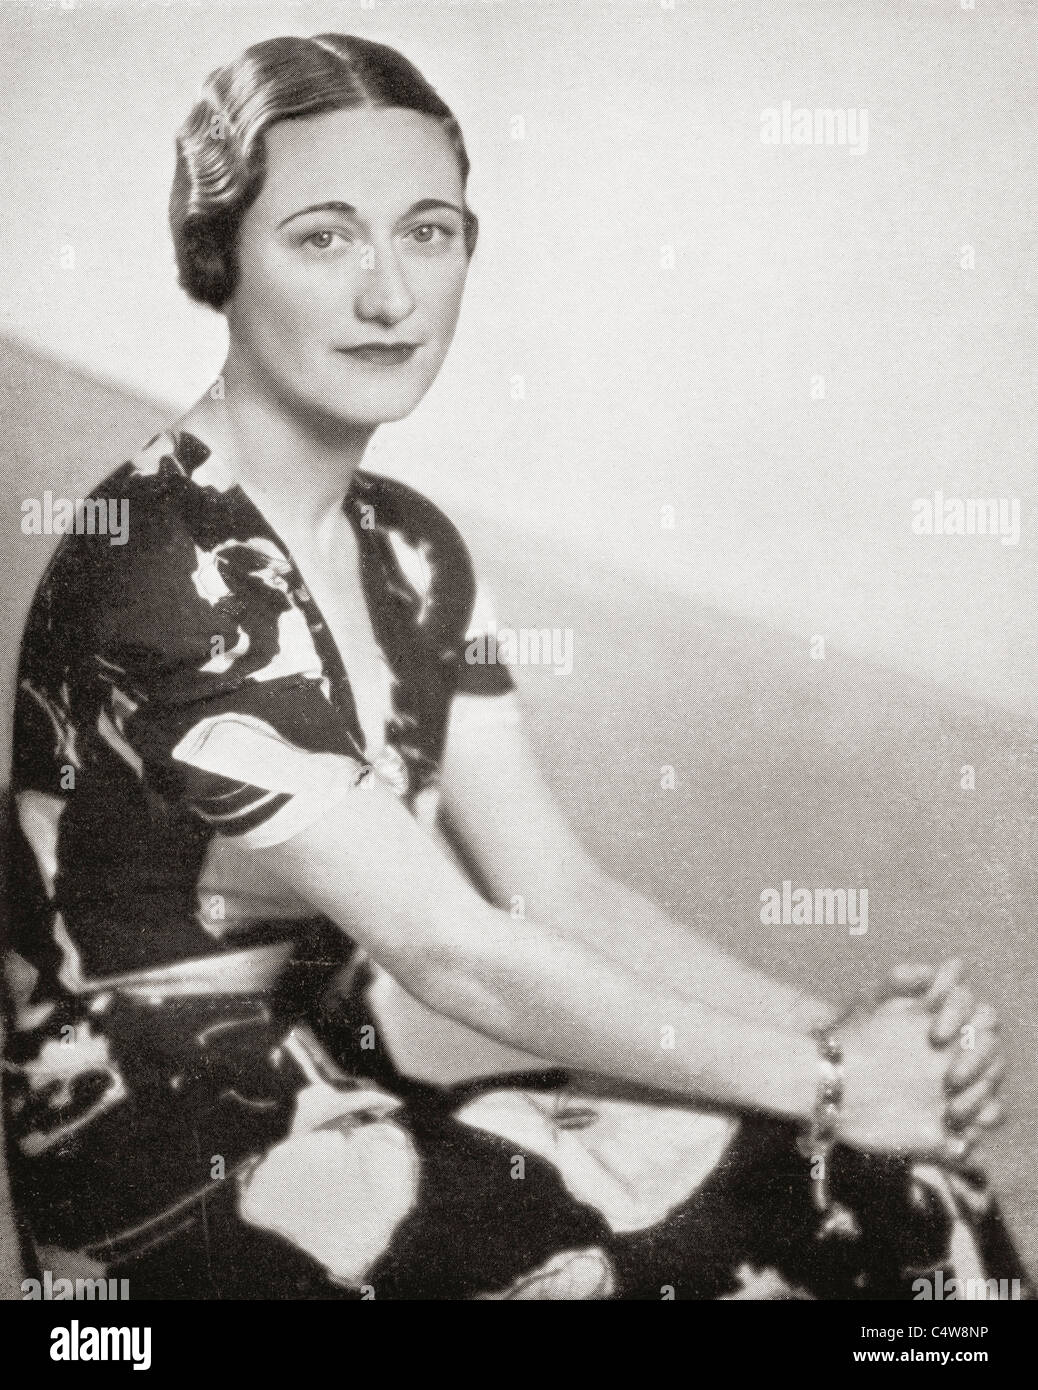 Wallis Simpson, previously Wallis Spencer, later the Duchess of Windsor, 1896 - 1986. Stock Photo